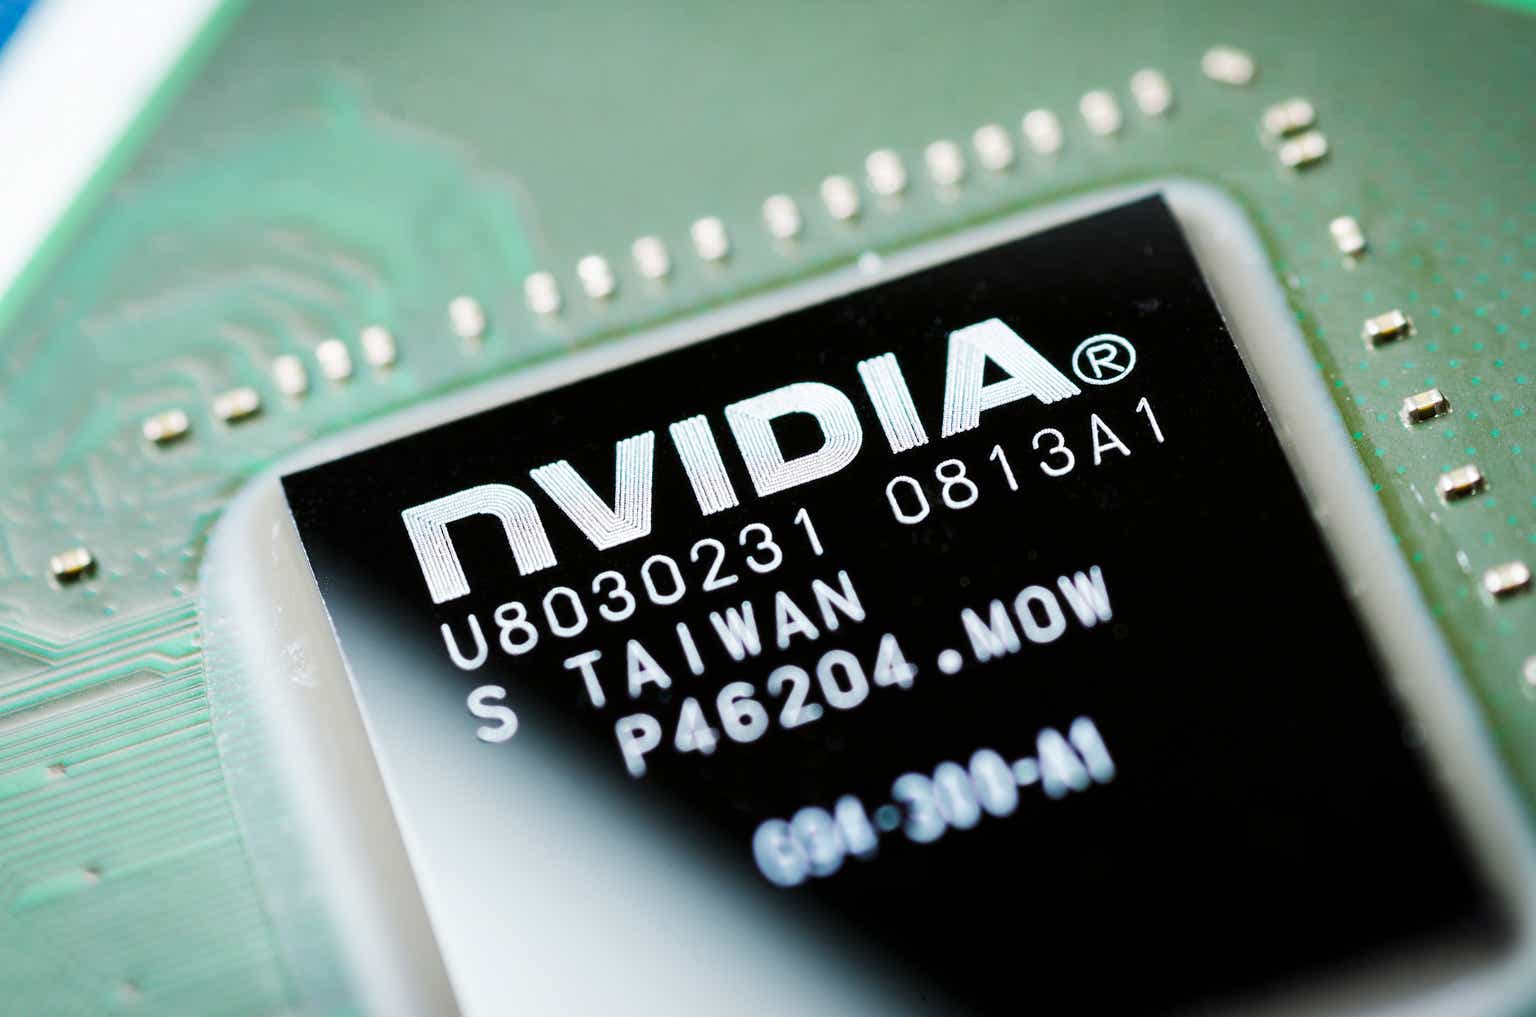 Why I Think Nvidia Will Continue Returning Value In The Long Run